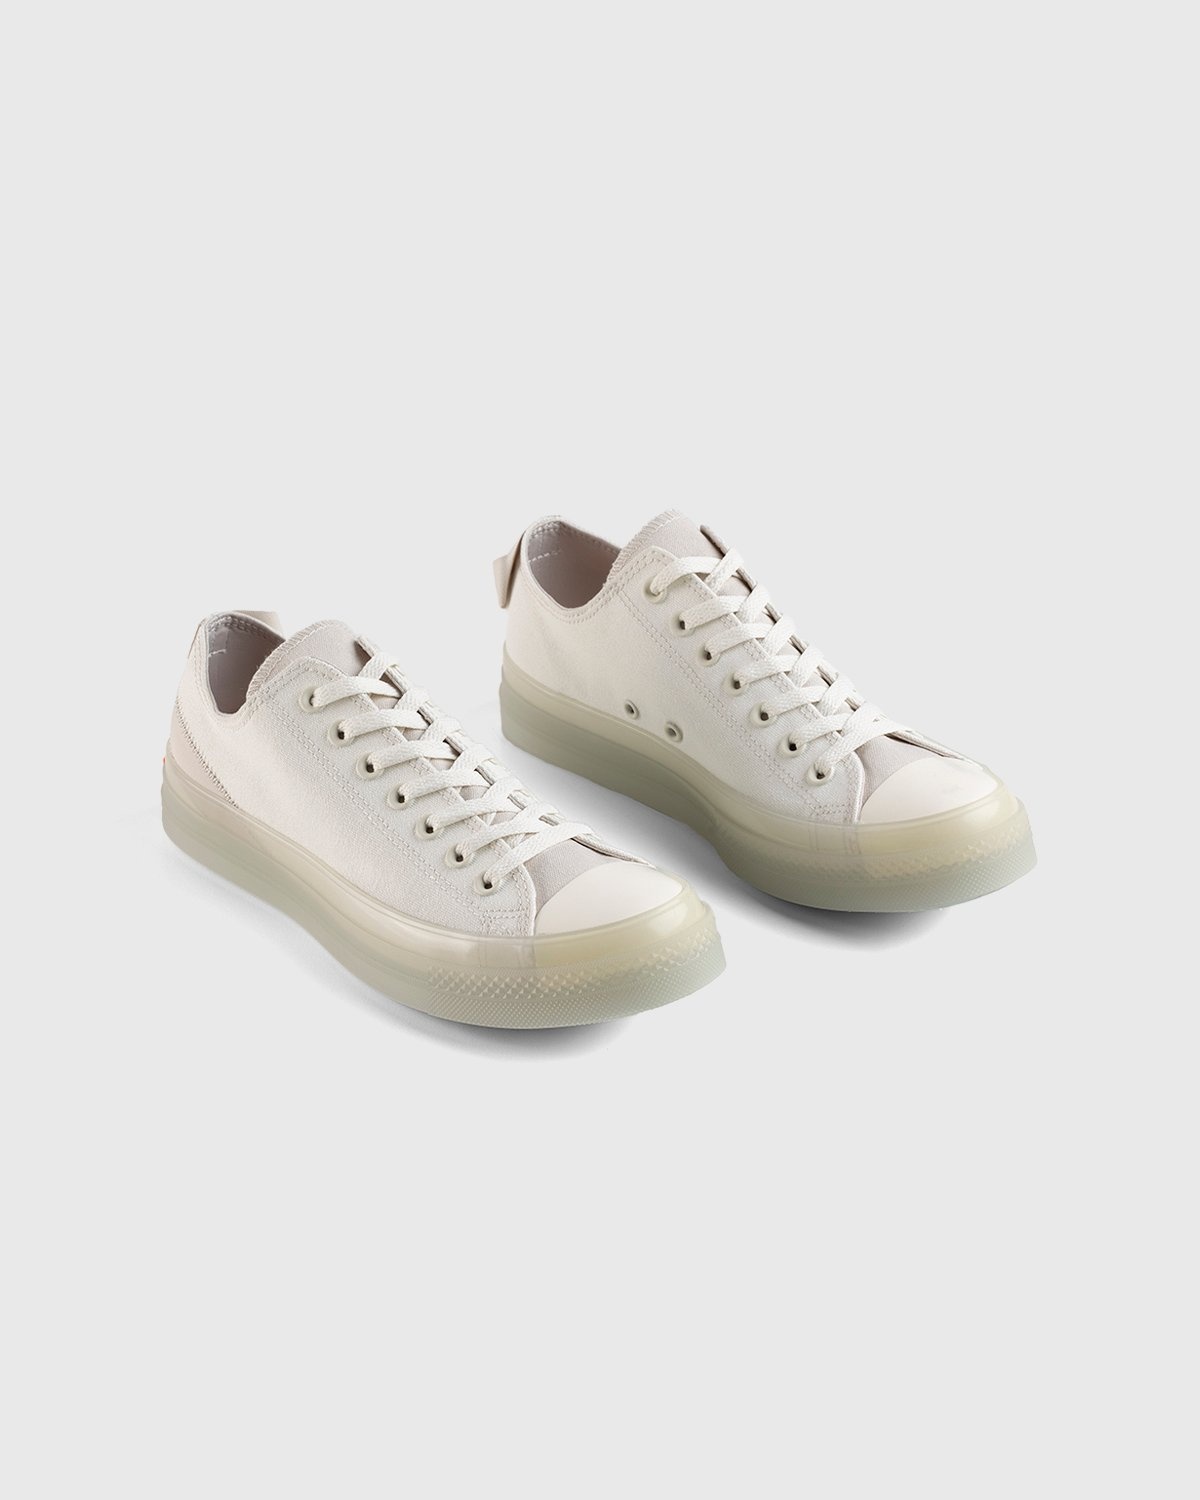 Converse – Chuck Taylor All Star CX Egret/Desert Sand - Low Top Sneakers - Grey - Image 7